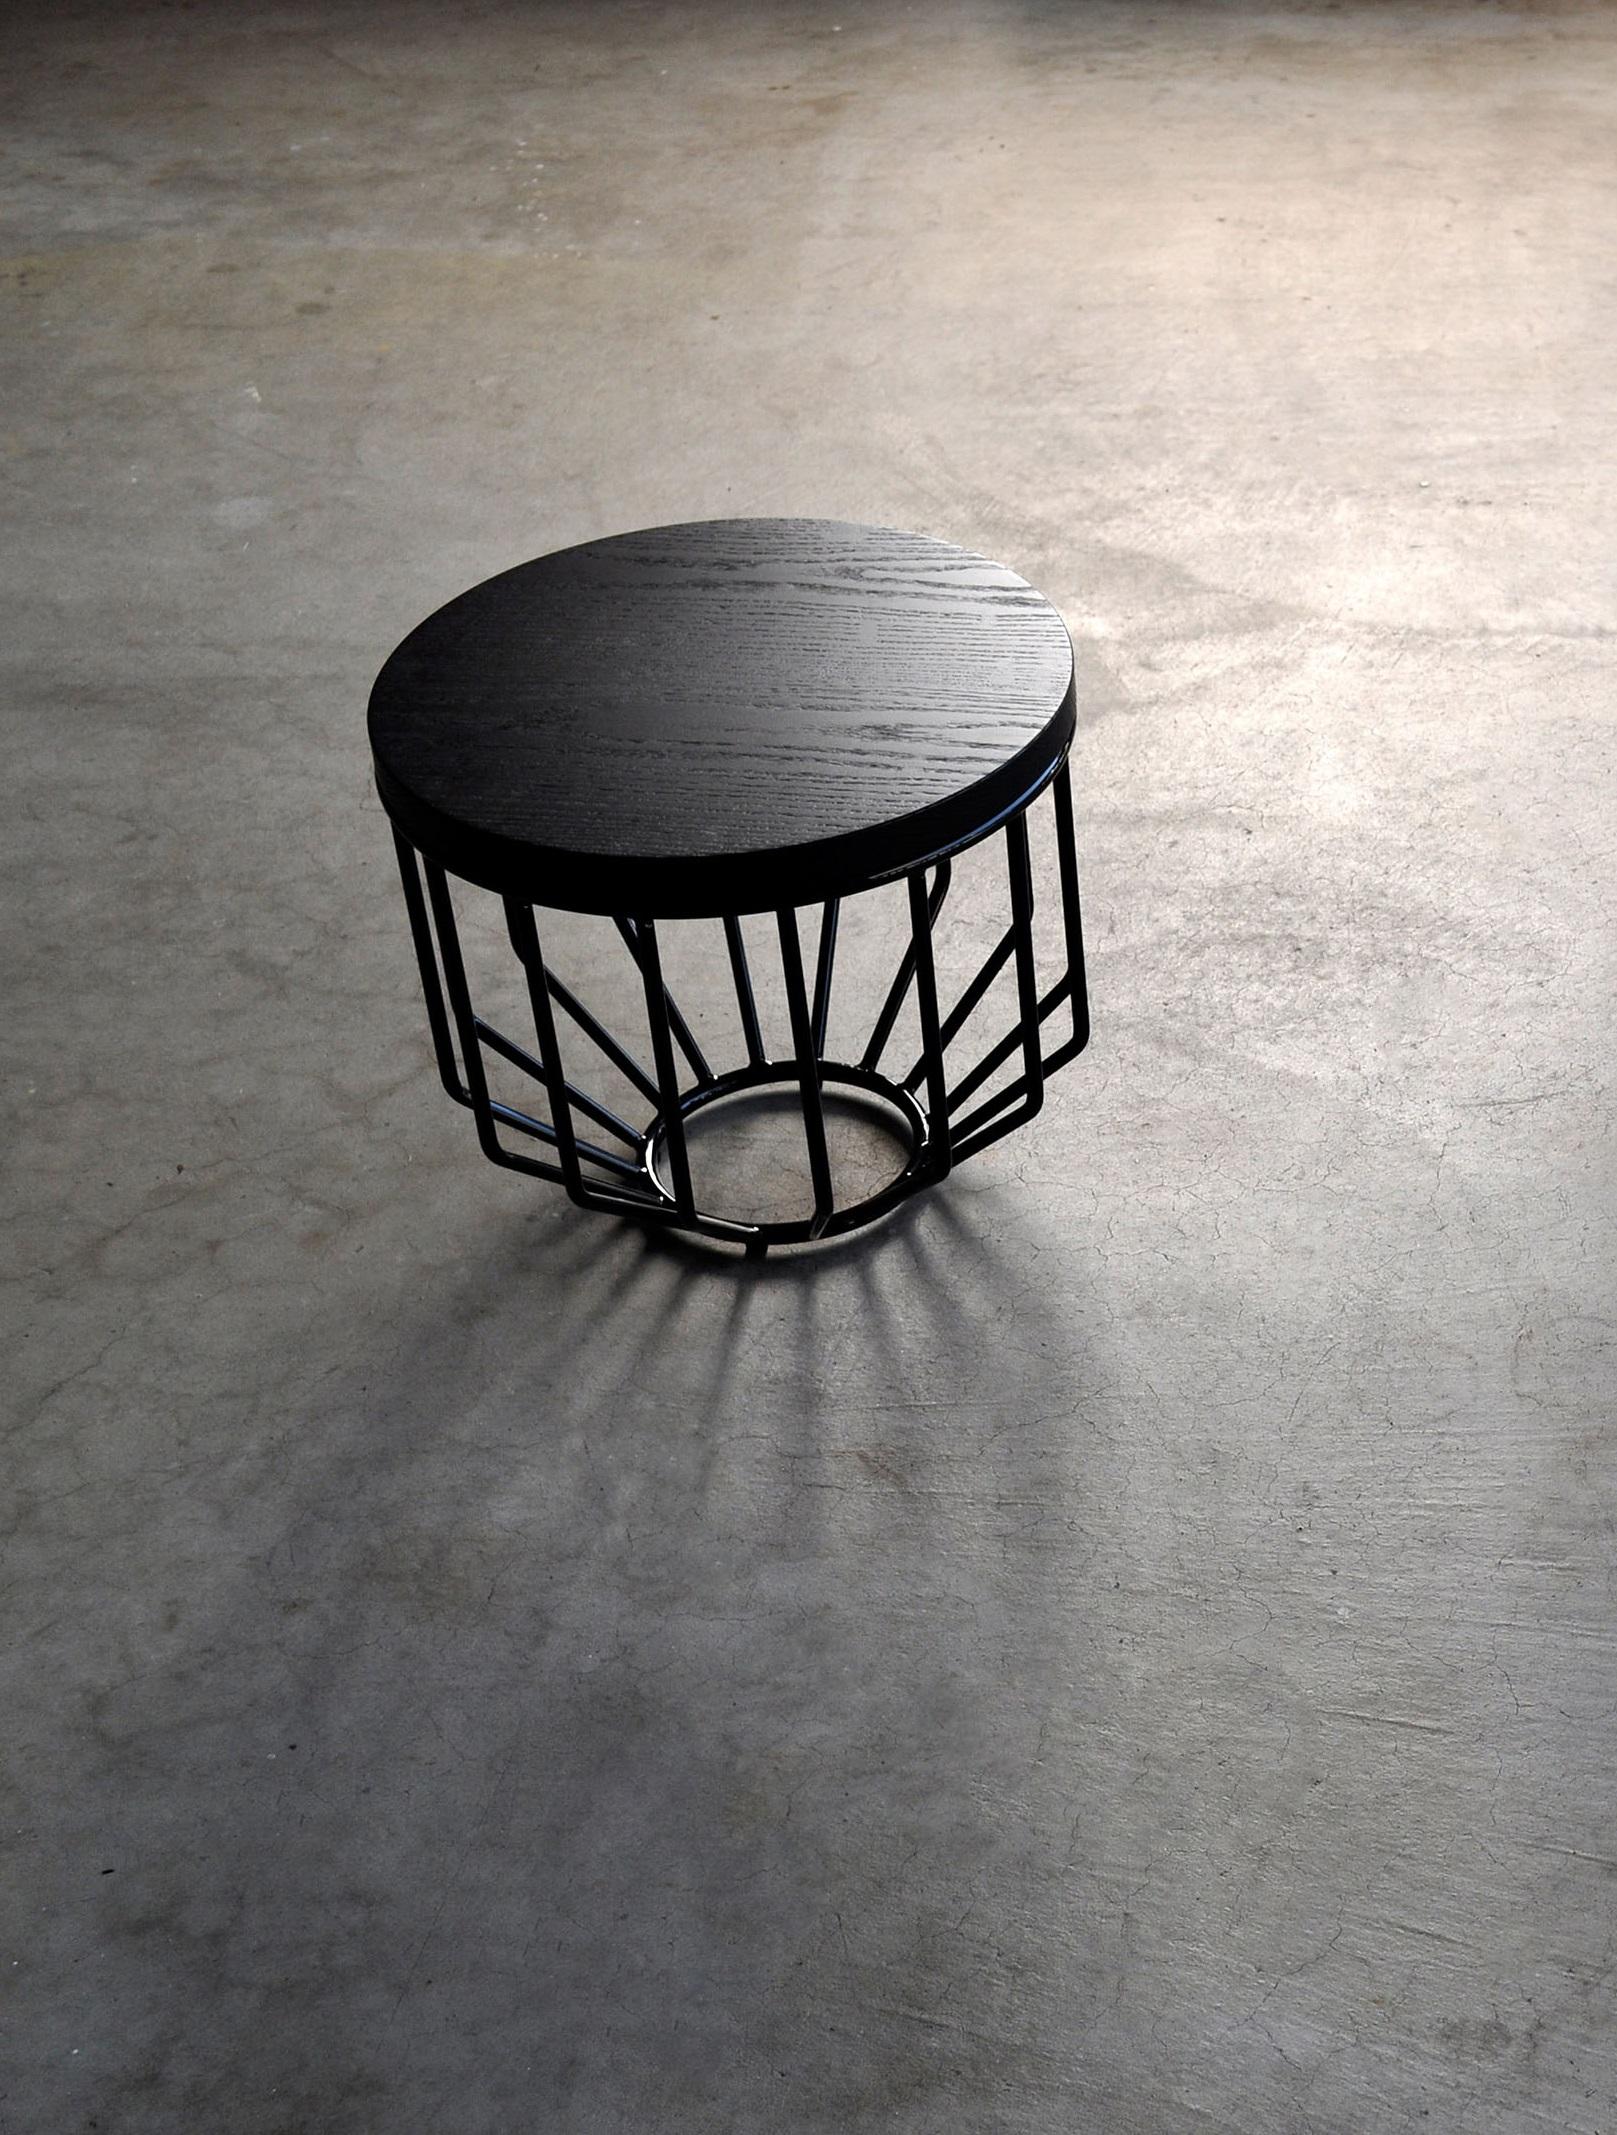 Wired Small Side Table by Phase Design
Dimensions: Ø 38,1 x H 33 cm. 
Materials: Ebonized oak and powder-coated metal. 

Solid steel bar with solid wooden tops, available in walnut, white oak, or ebonized oak. Steel available in gloss or flat black